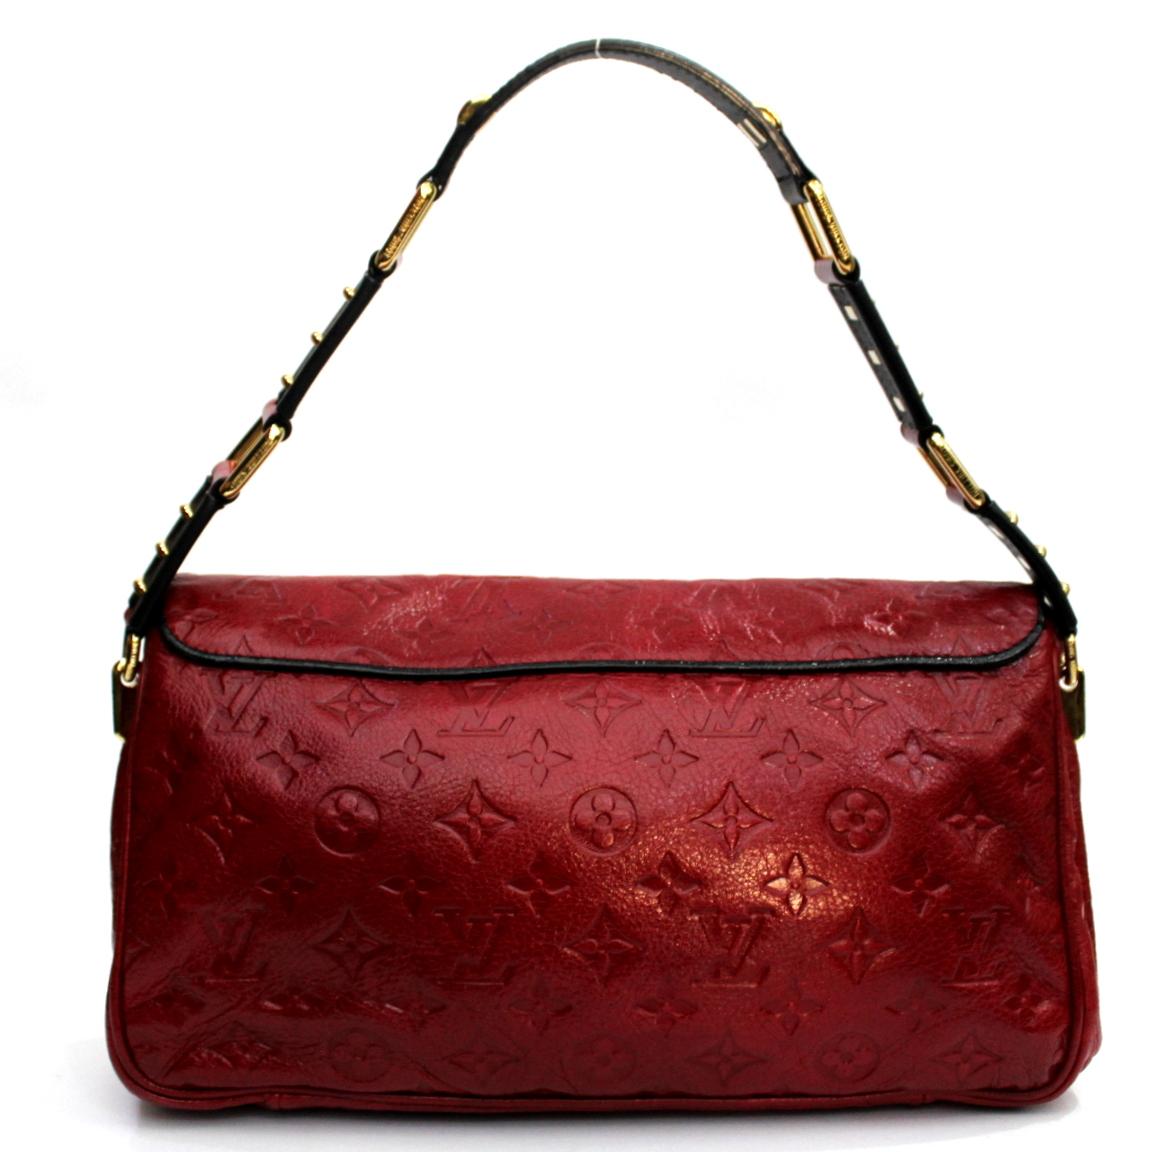 From the Fall Winter 2009 2010 this beautiful bag. It is the Monogram My Deer Collection. The actual material used is deer skin embossed with the famous monogram flowers. The color used : red, deep blue and gold hardware. Very good condition. Retail